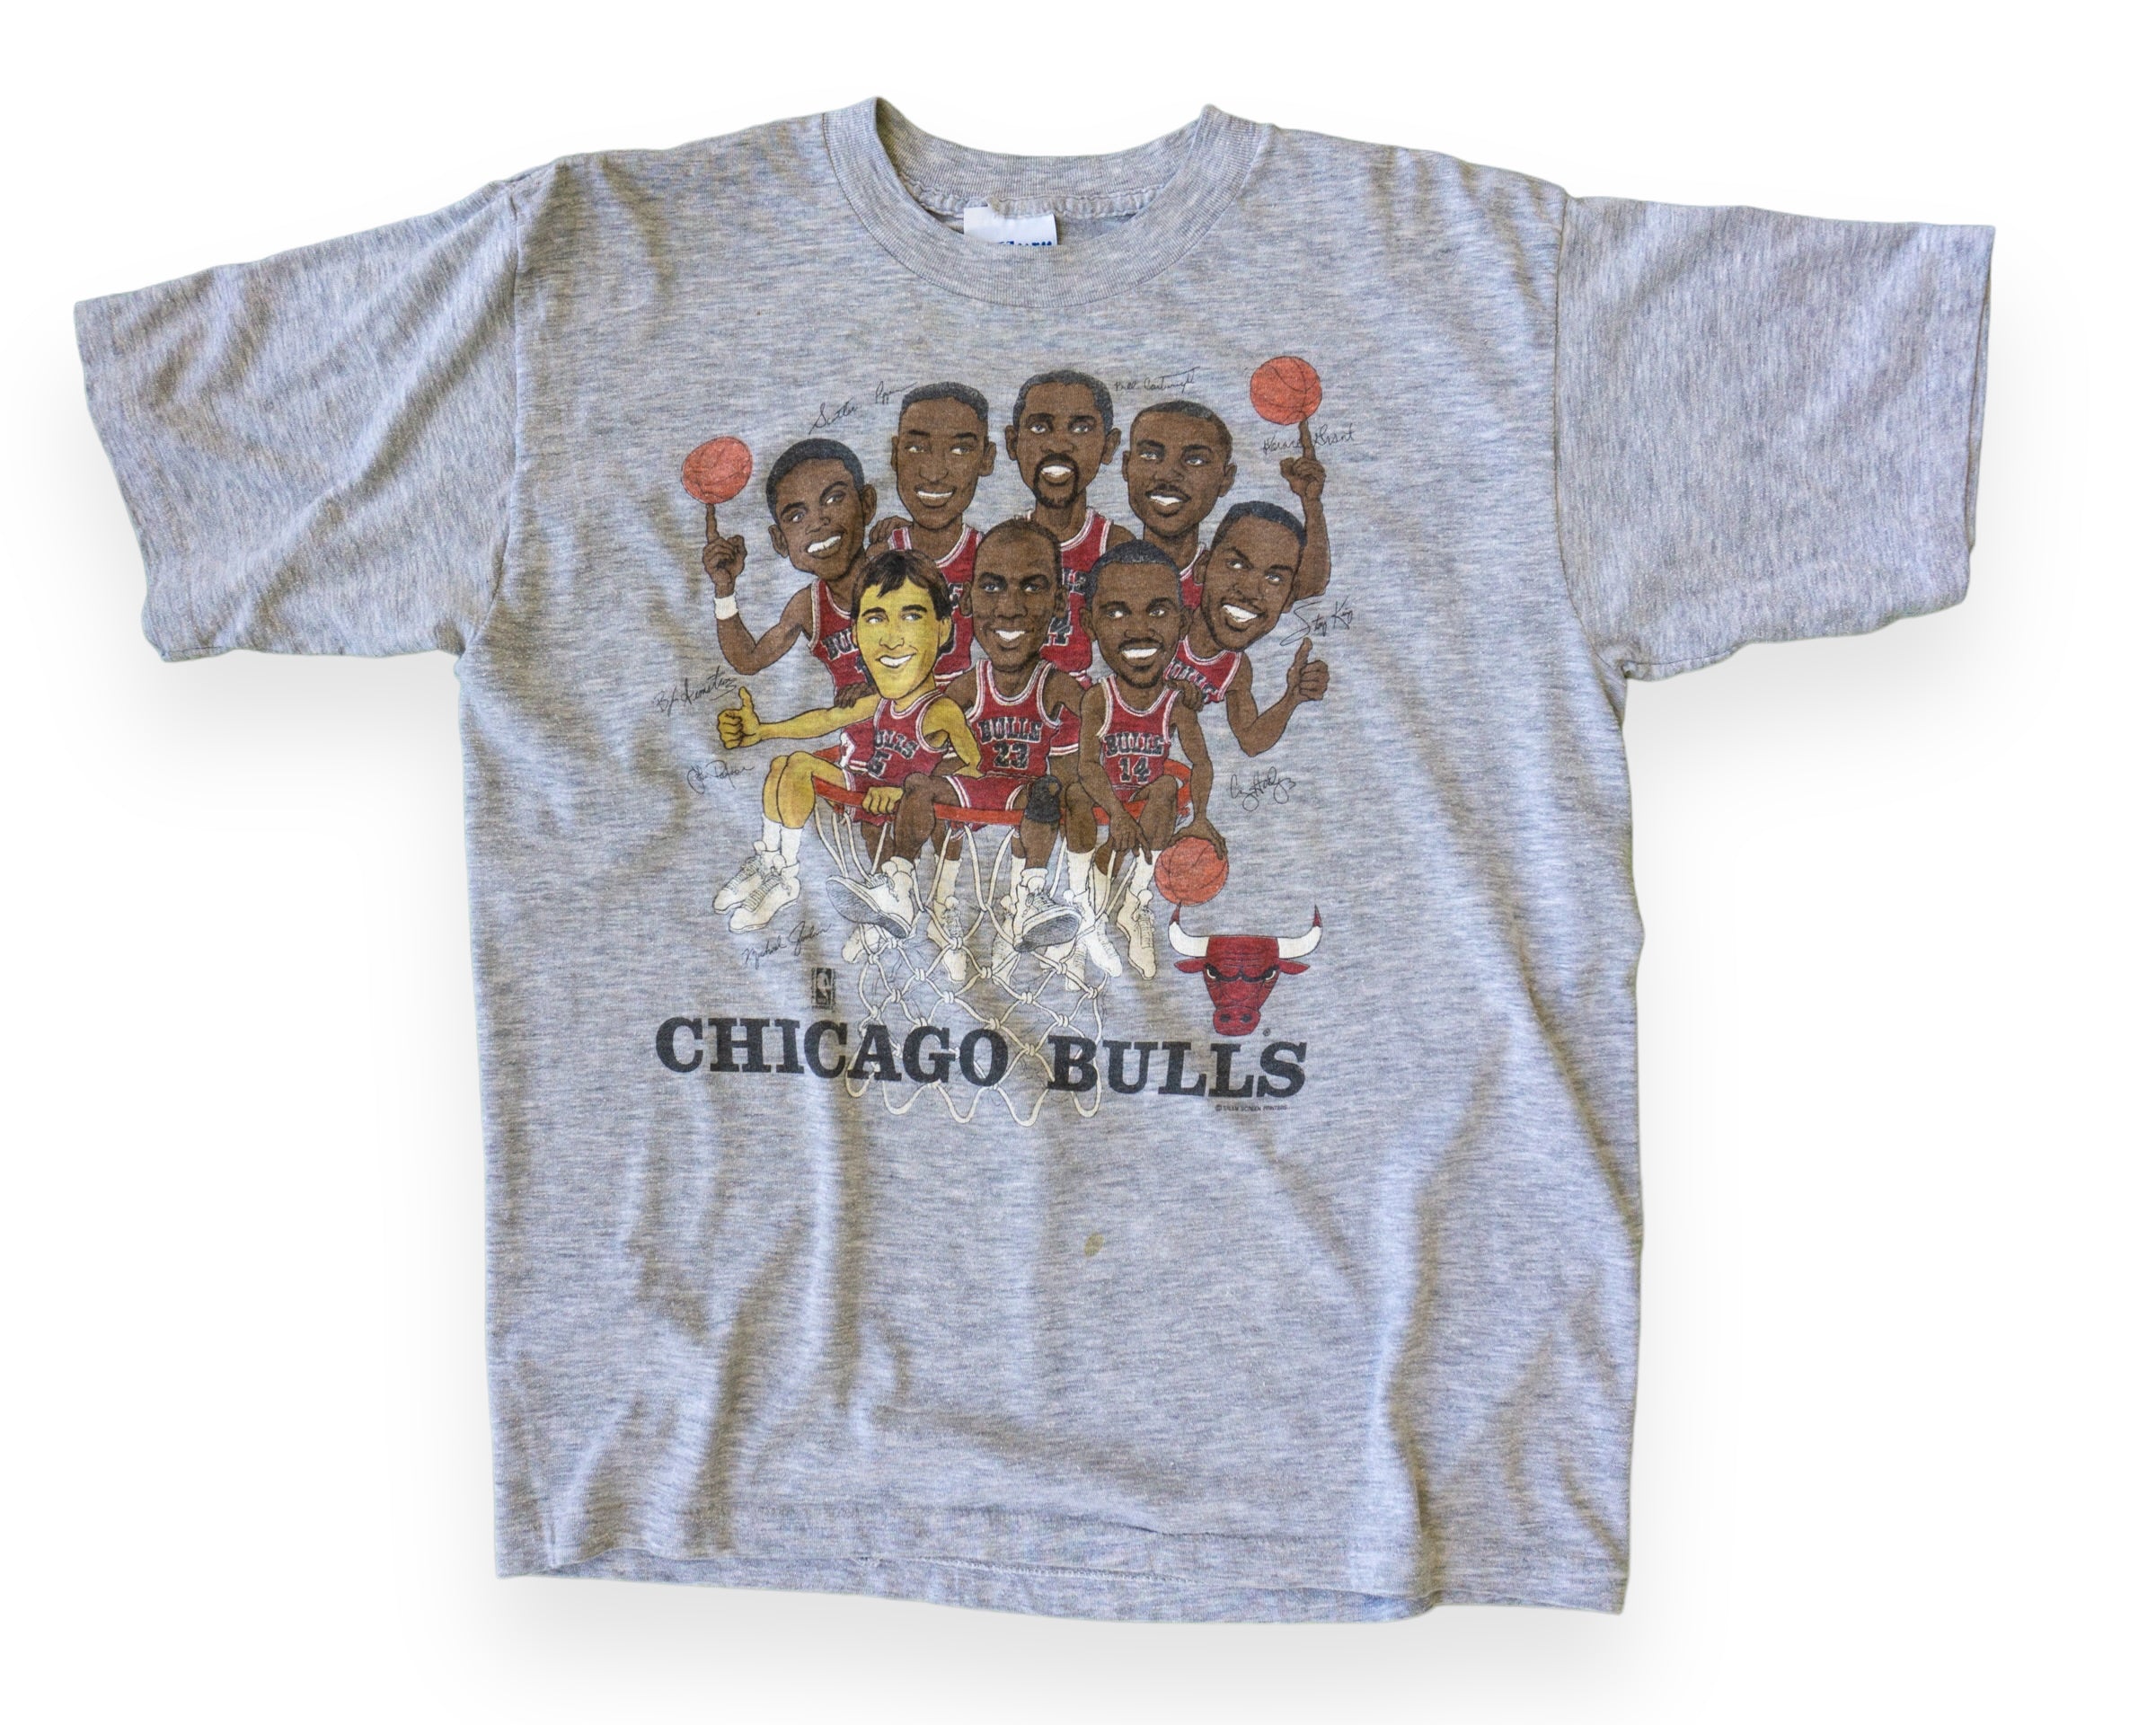 Sports / College Vintage All Over Print NBA Chicago Bulls Tee Shirt 1990s Size Large Made in USA